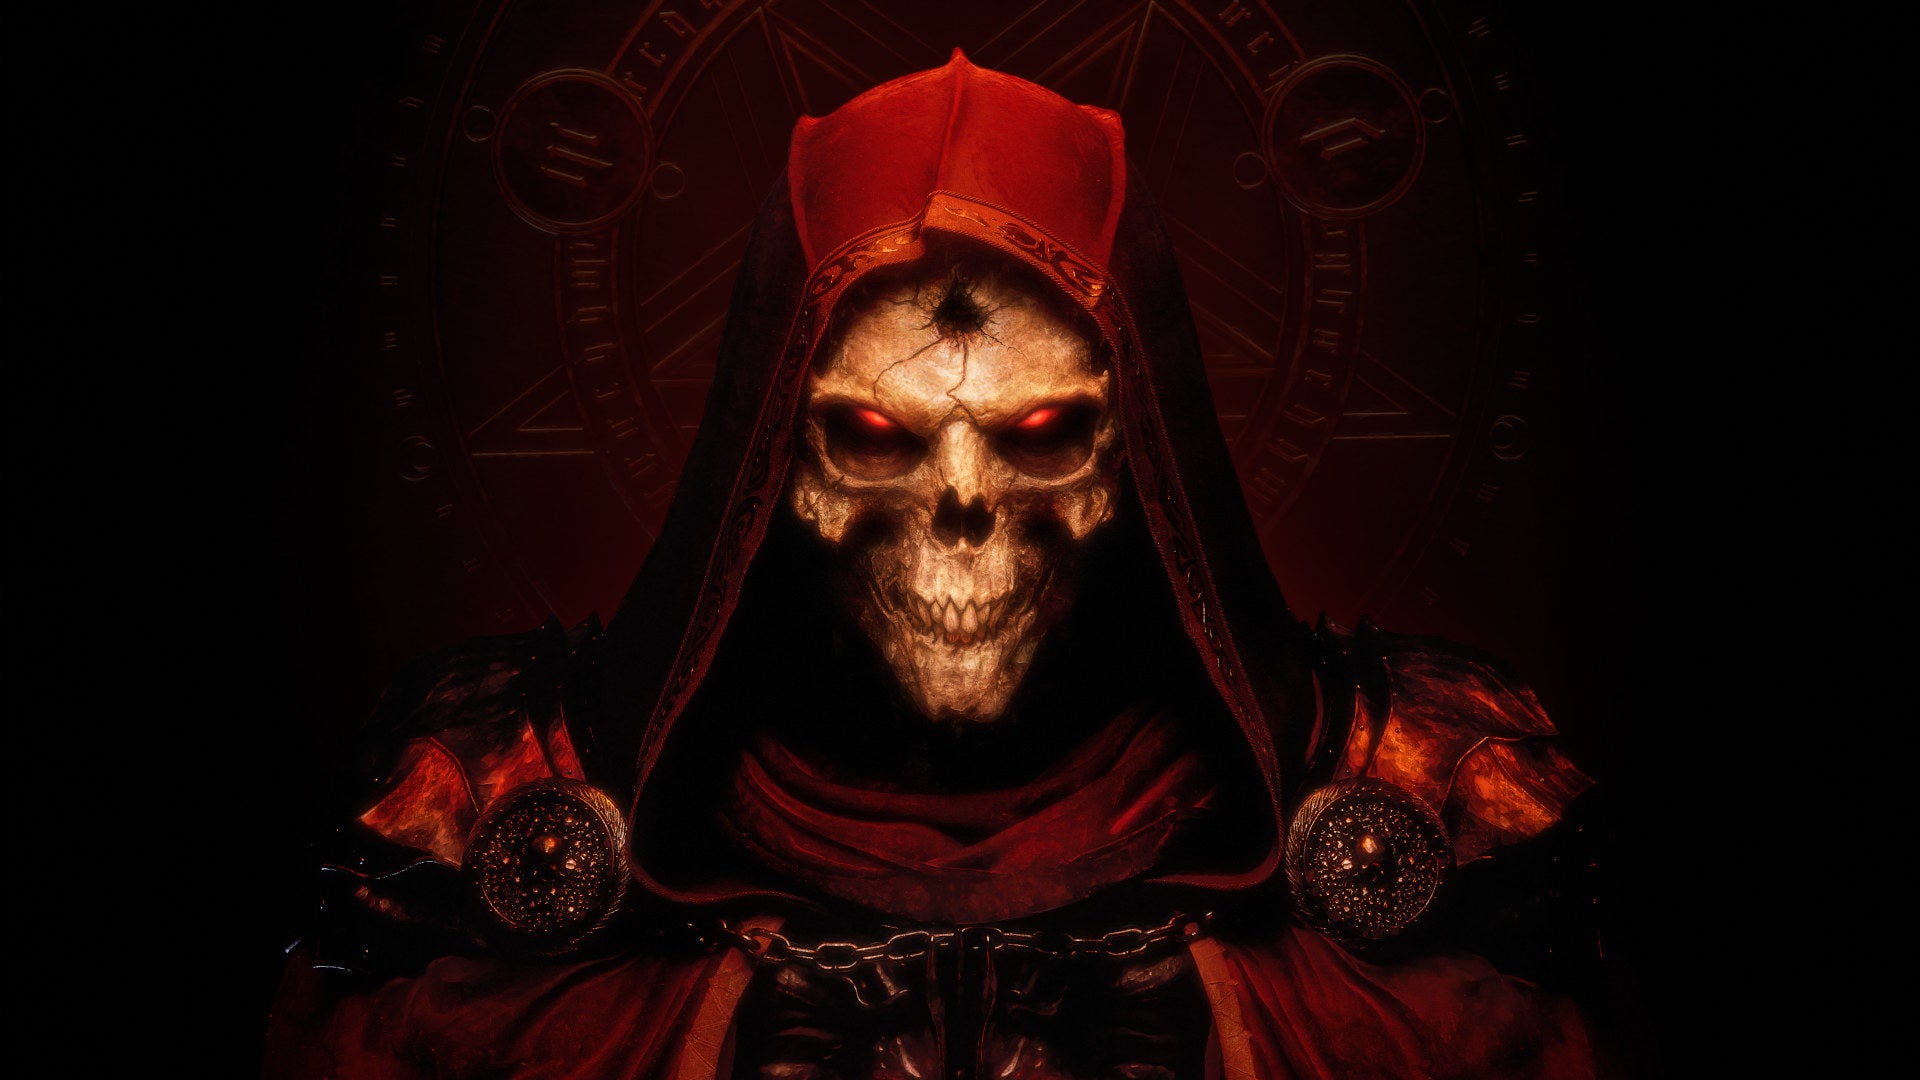 Diablo 2: Resurrected will operate a closed alpha this weekend